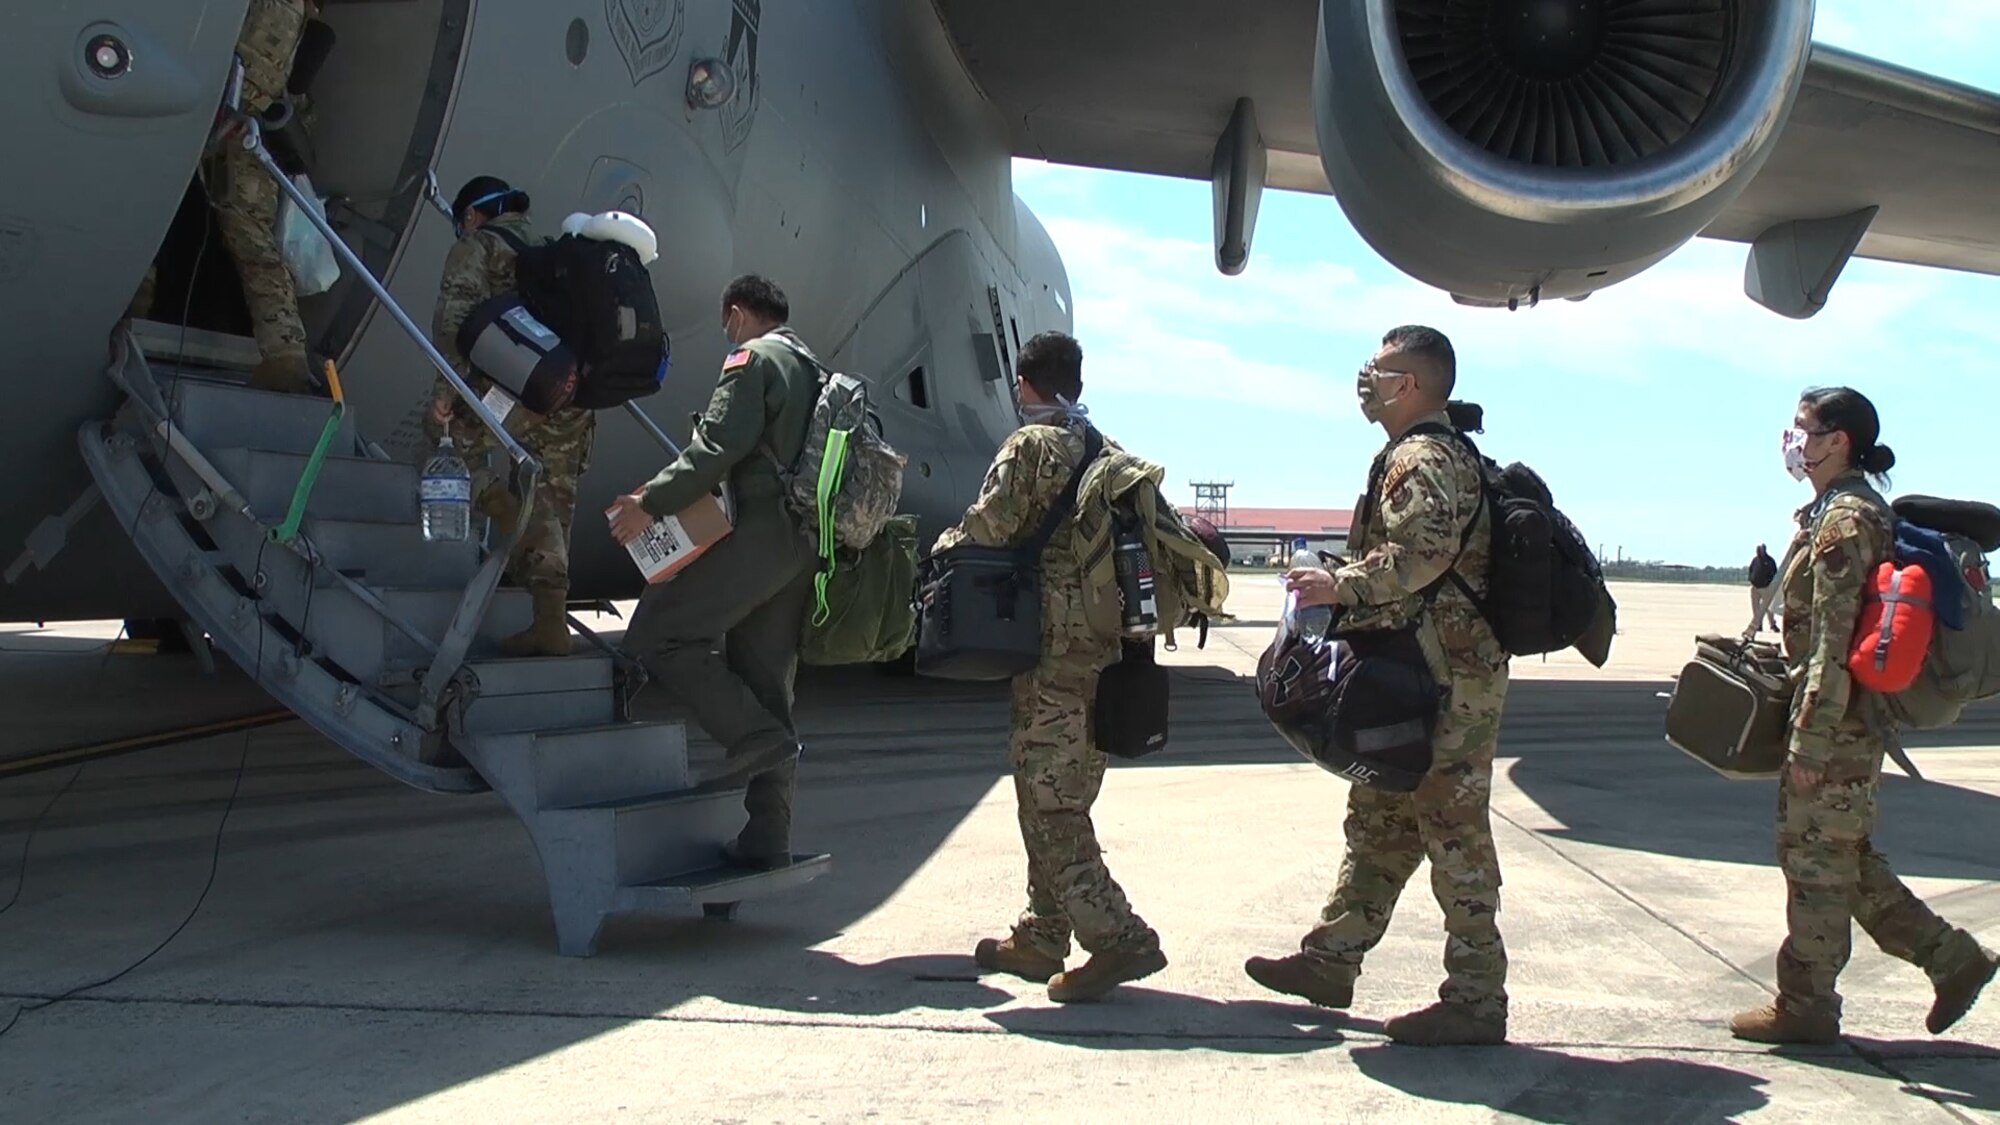 Personnel with the 433rd Aeromedical Evacuation Squadron board a C-17 Globemaster III April 15, 2020 at Joint Base San Antonio-Lackland, Texas.